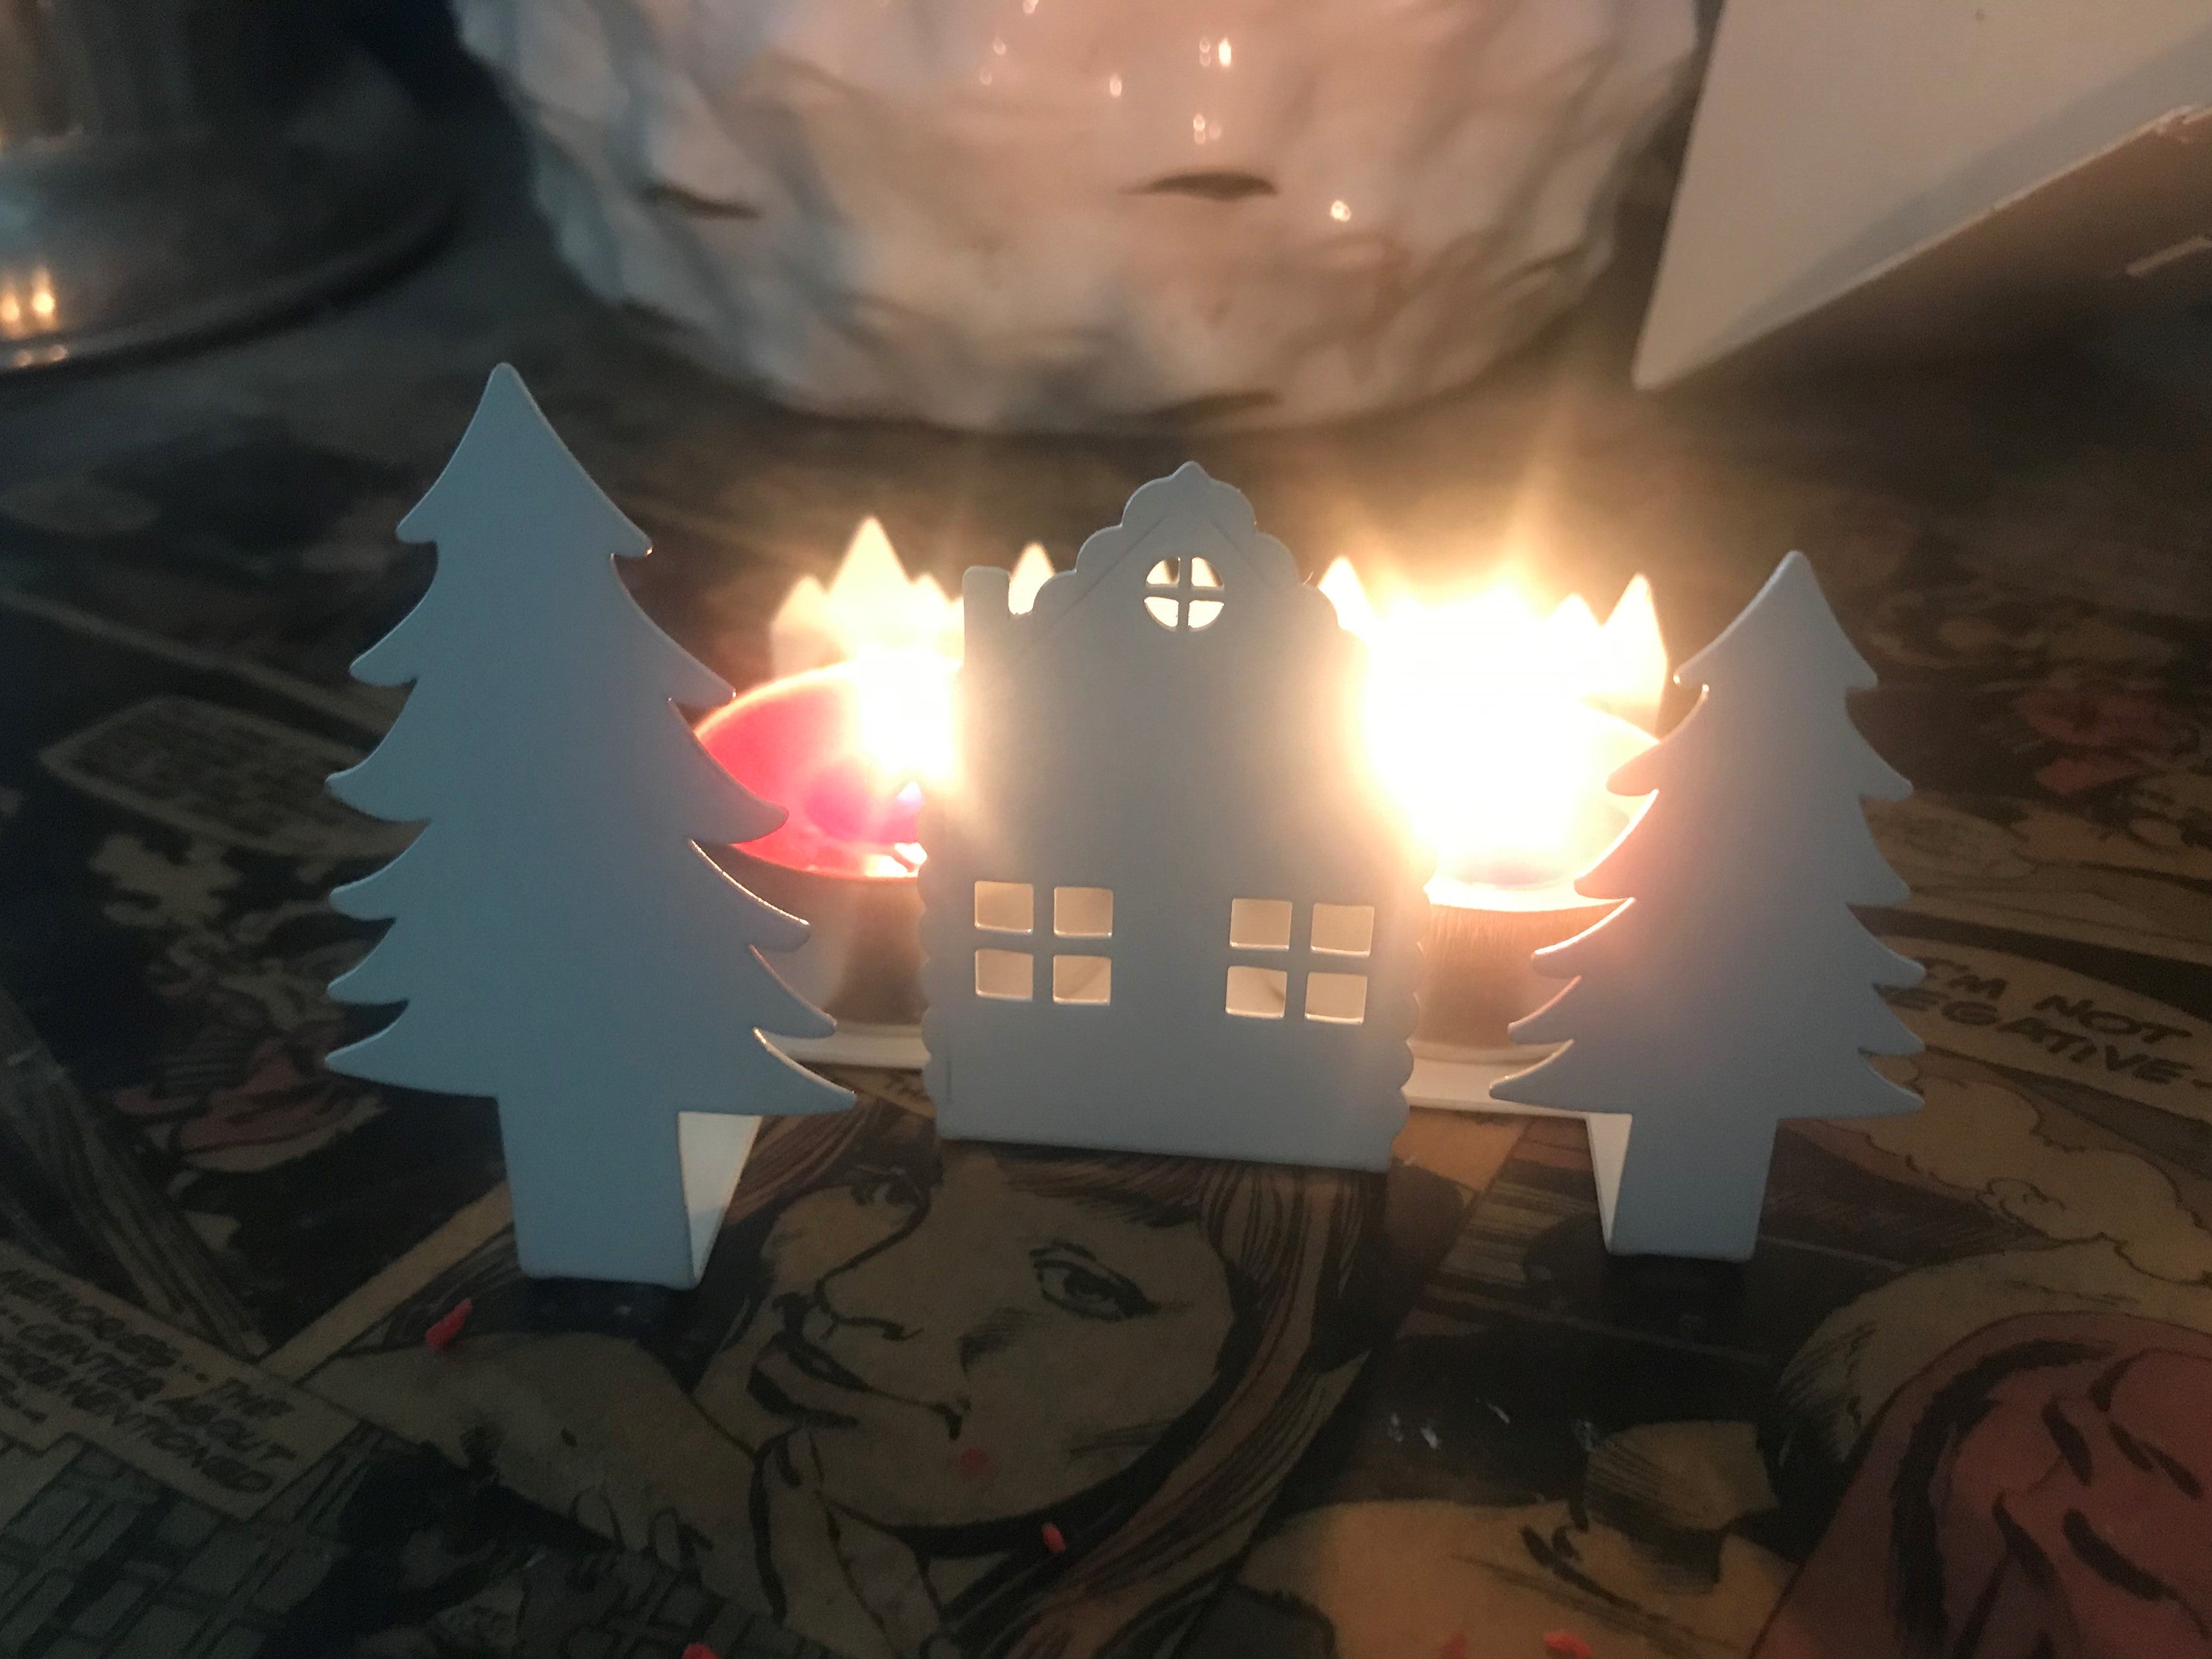 Log Cabin with Pine Tree Candle Holder